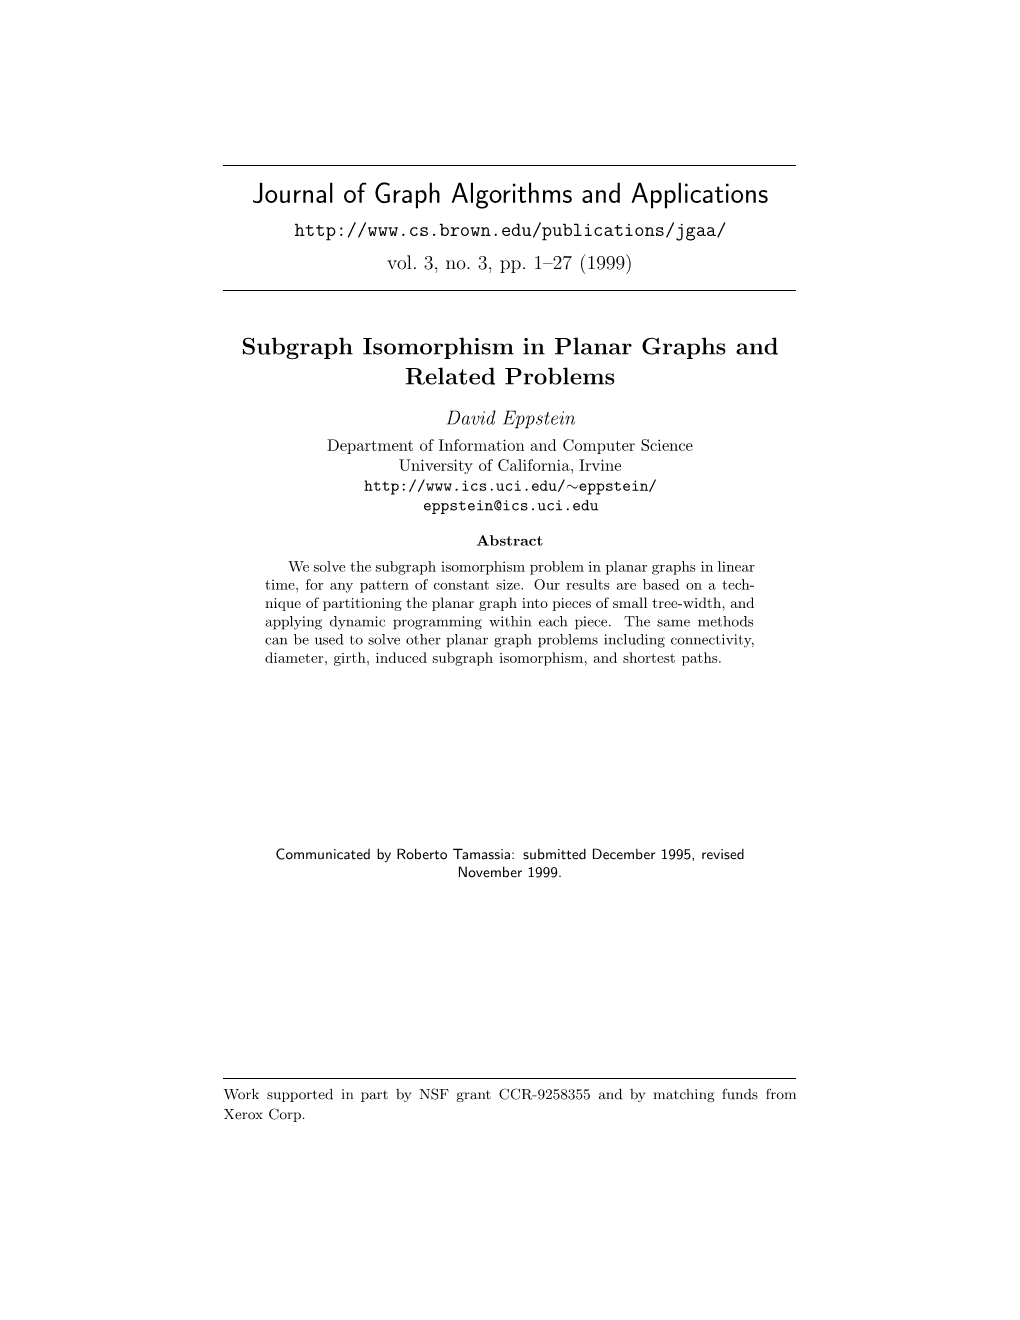 Subgraph Isomorphism in Planar Graphs and Related Problems